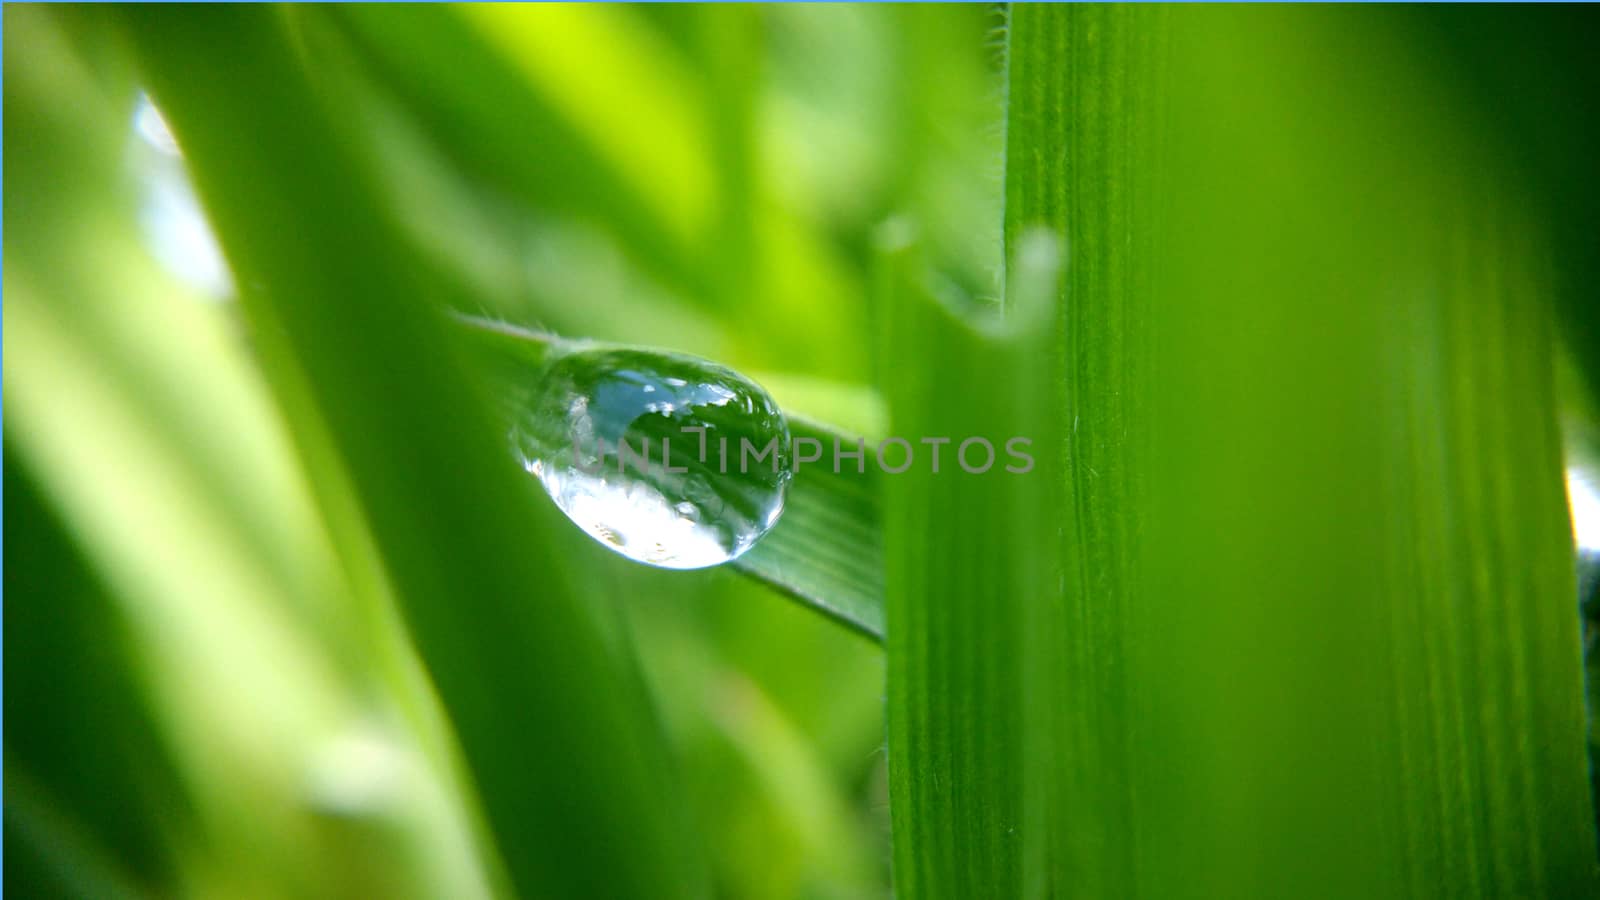 Alone morning drop on the green leaf, shooting close-up